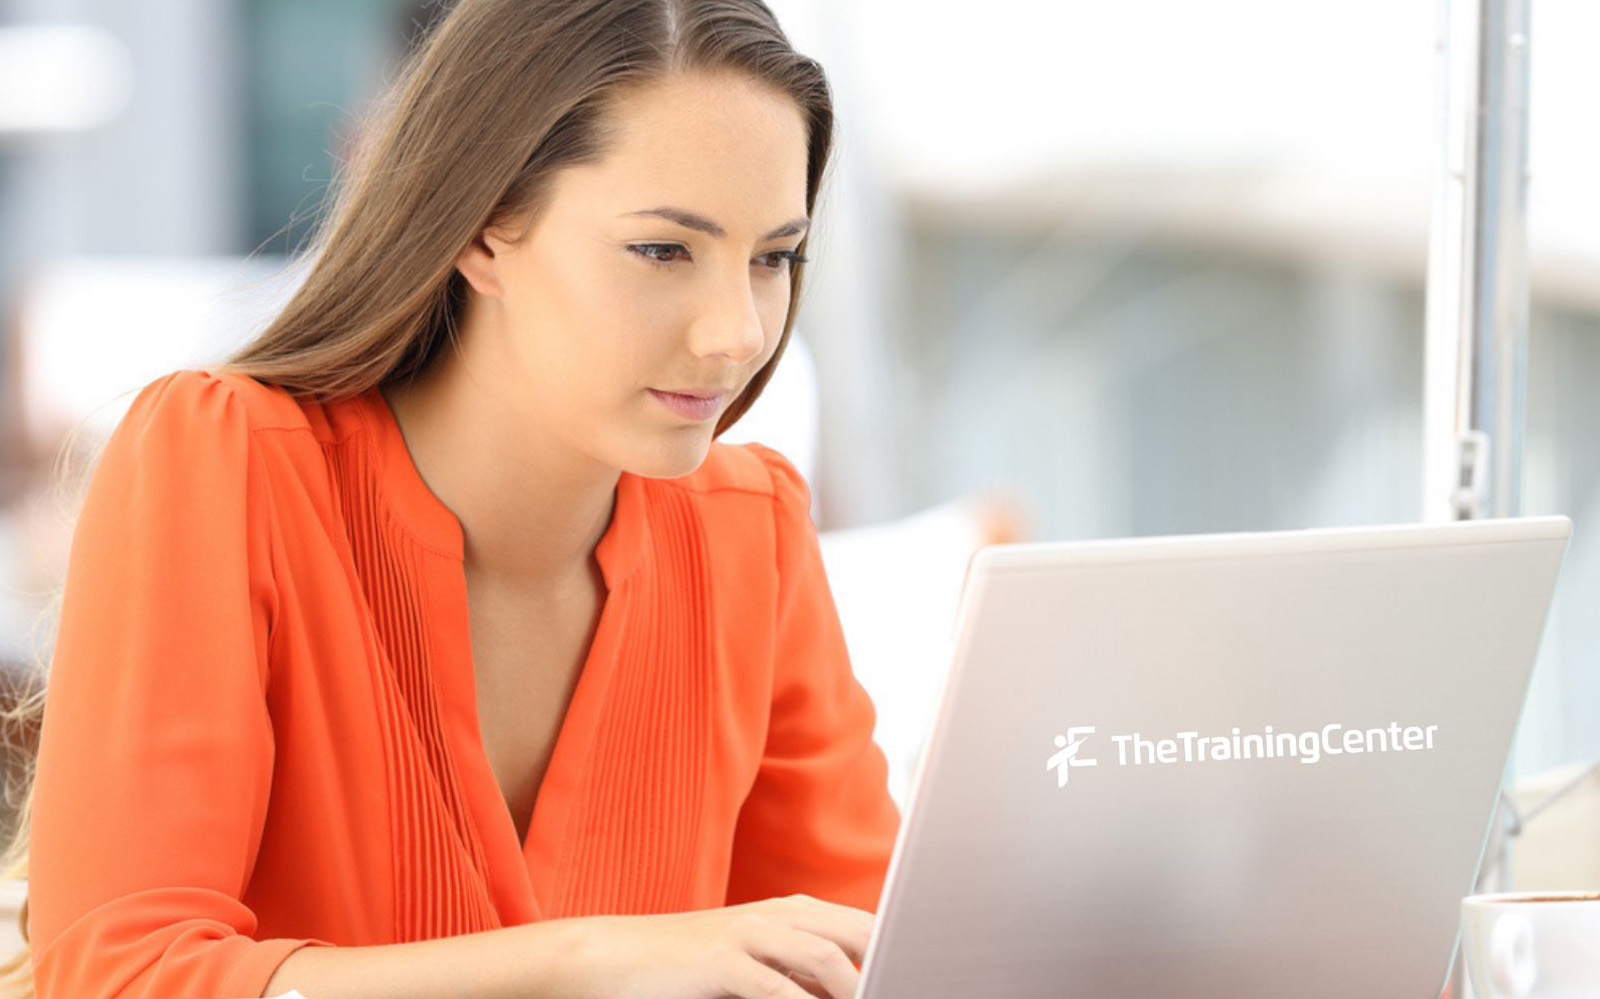 focused woman using a laptop training